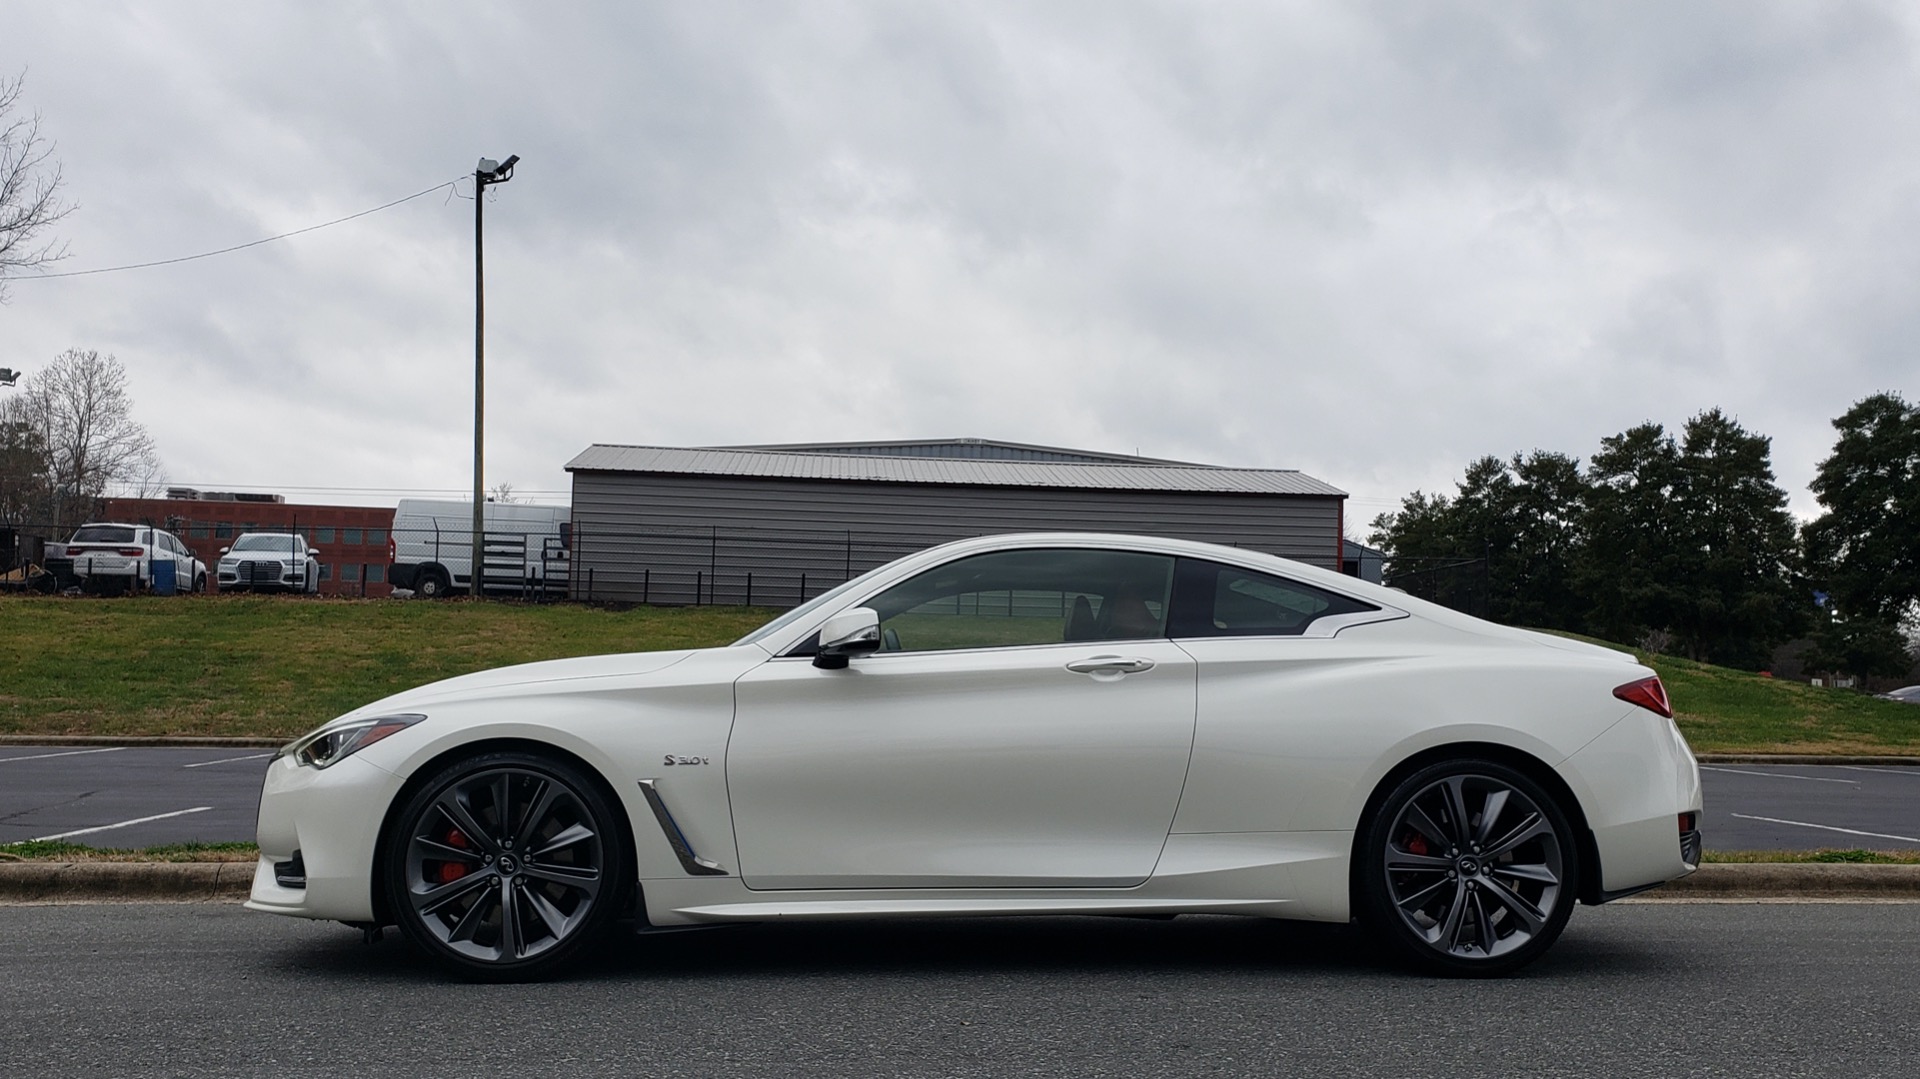 Used 2018 Infiniti Q60 RED SPORT 400 / SENSORY PKG / SUNROOF / NAV / REARVIEW for sale Sold at Formula Imports in Charlotte NC 28227 2